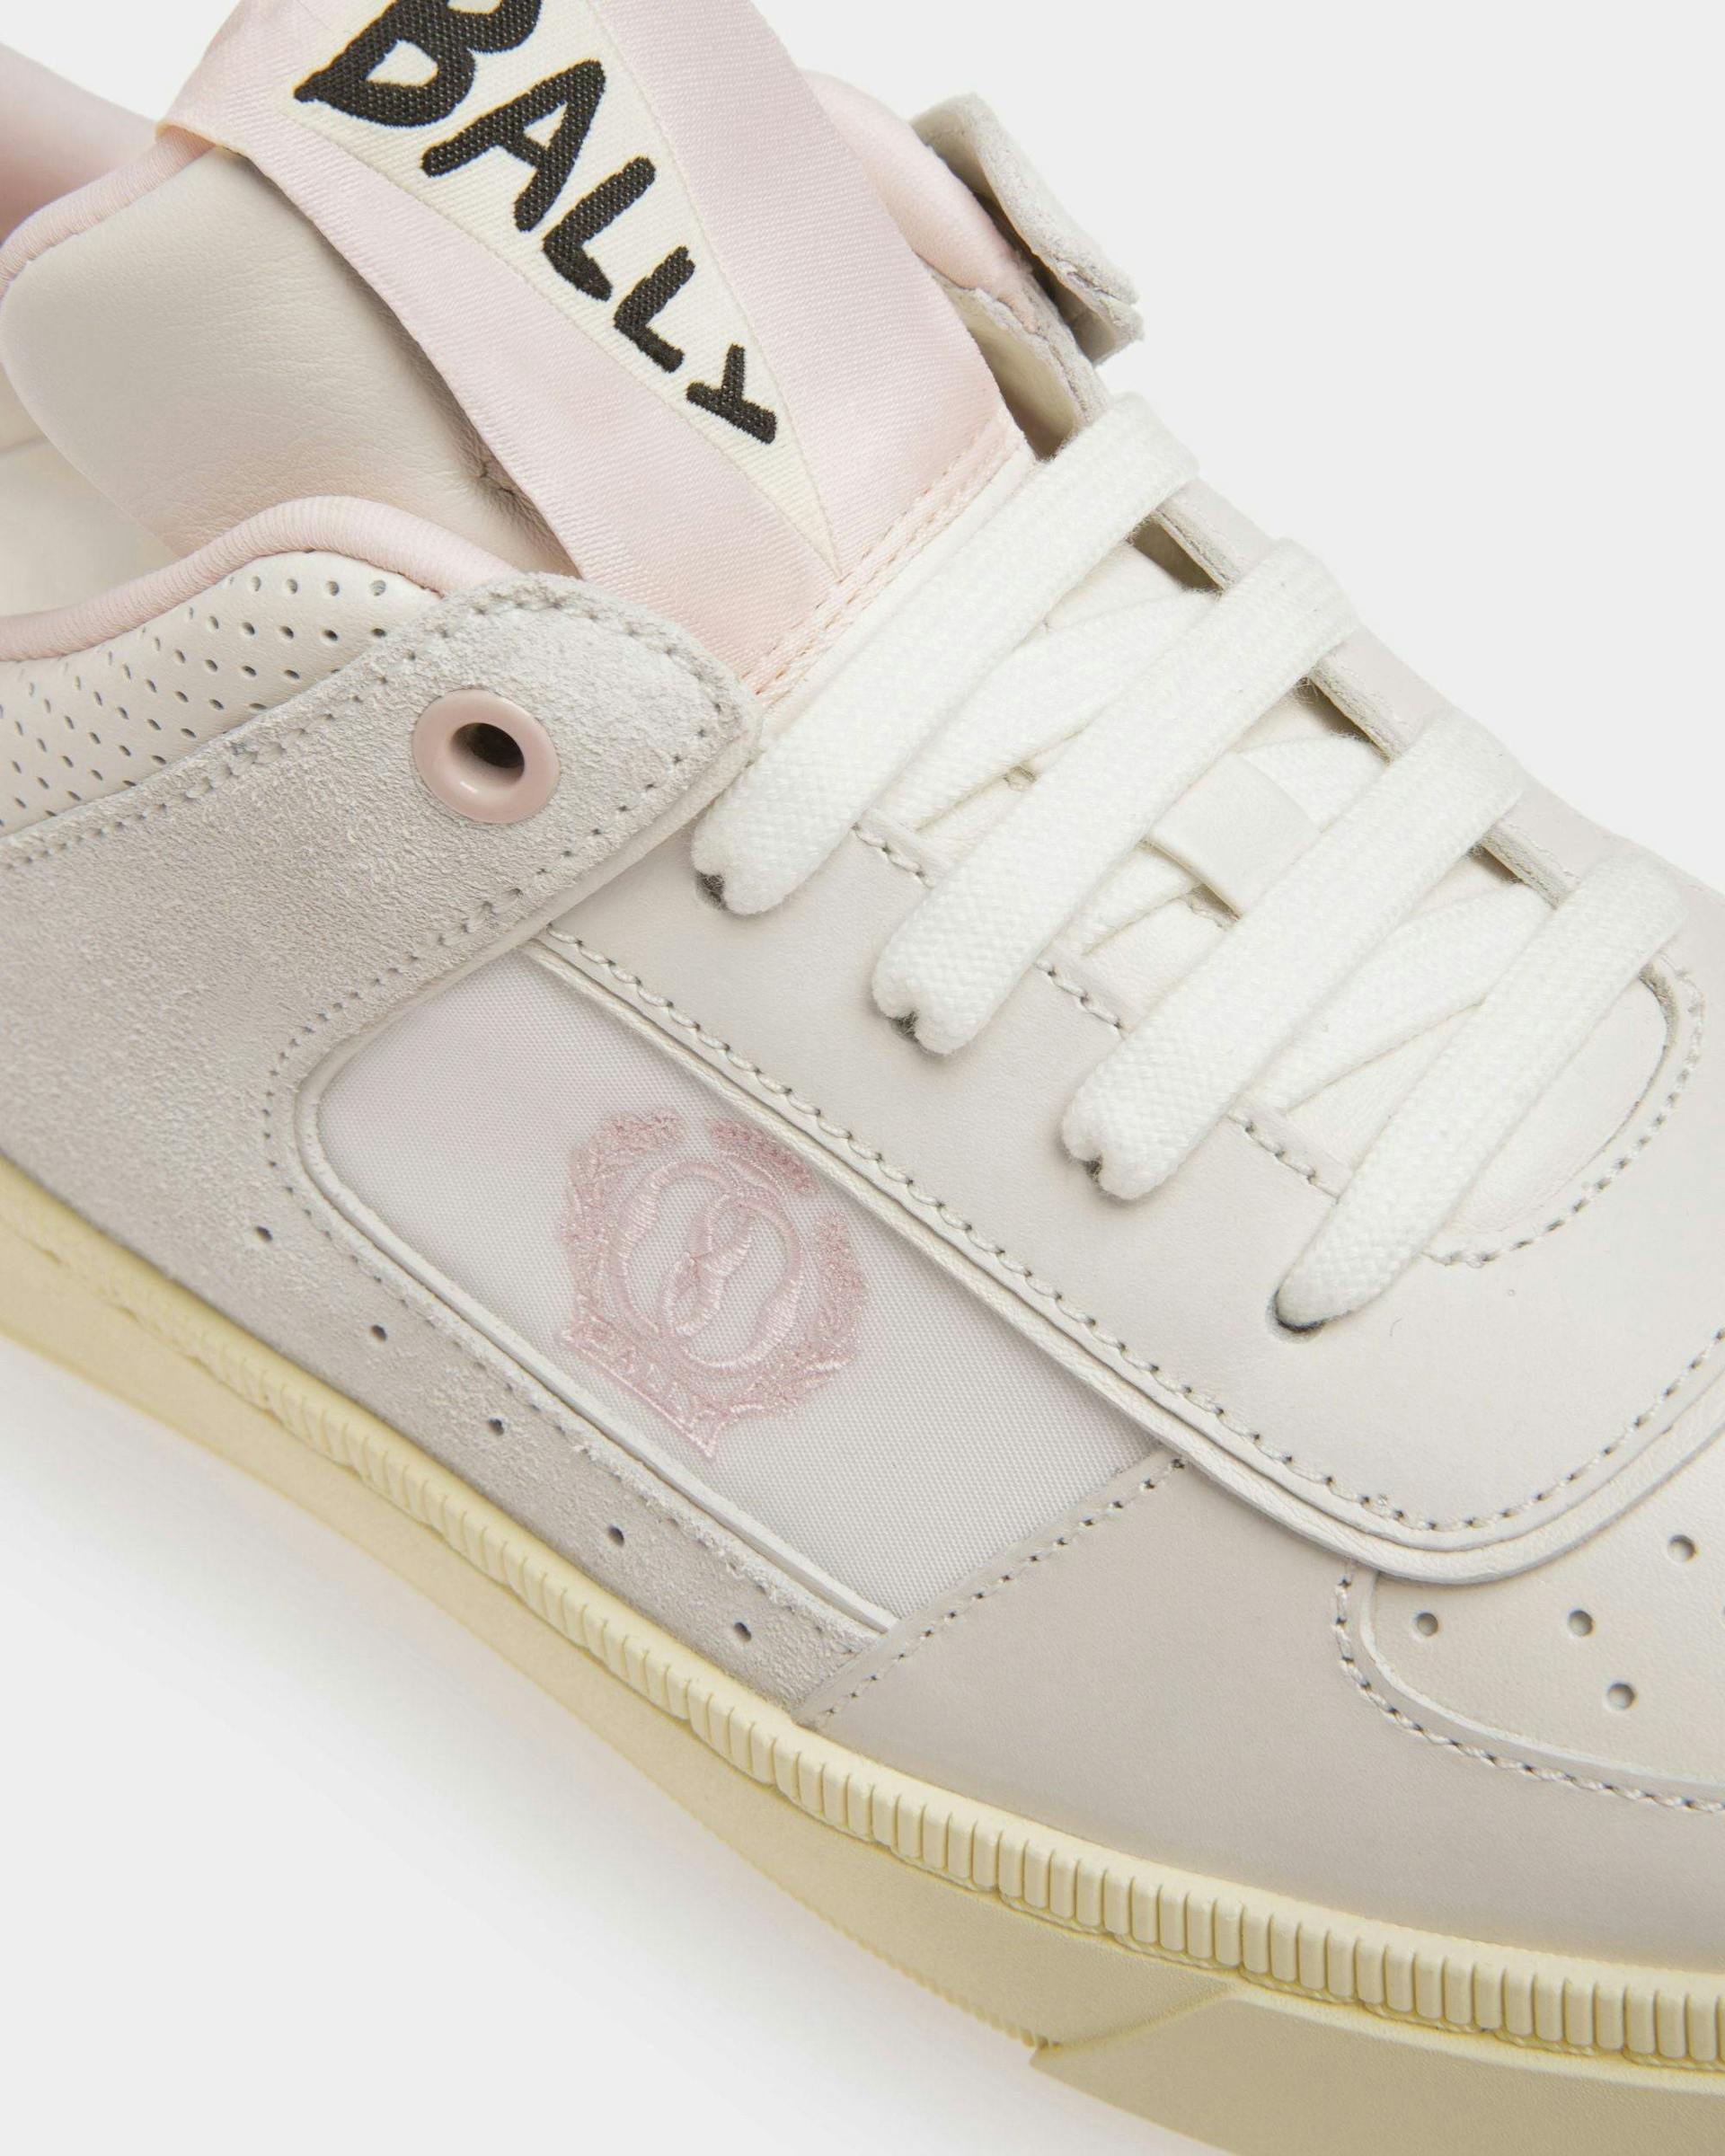 Women's Raise Sneakers In White And Pink Leather | Bally | Still Life Detail